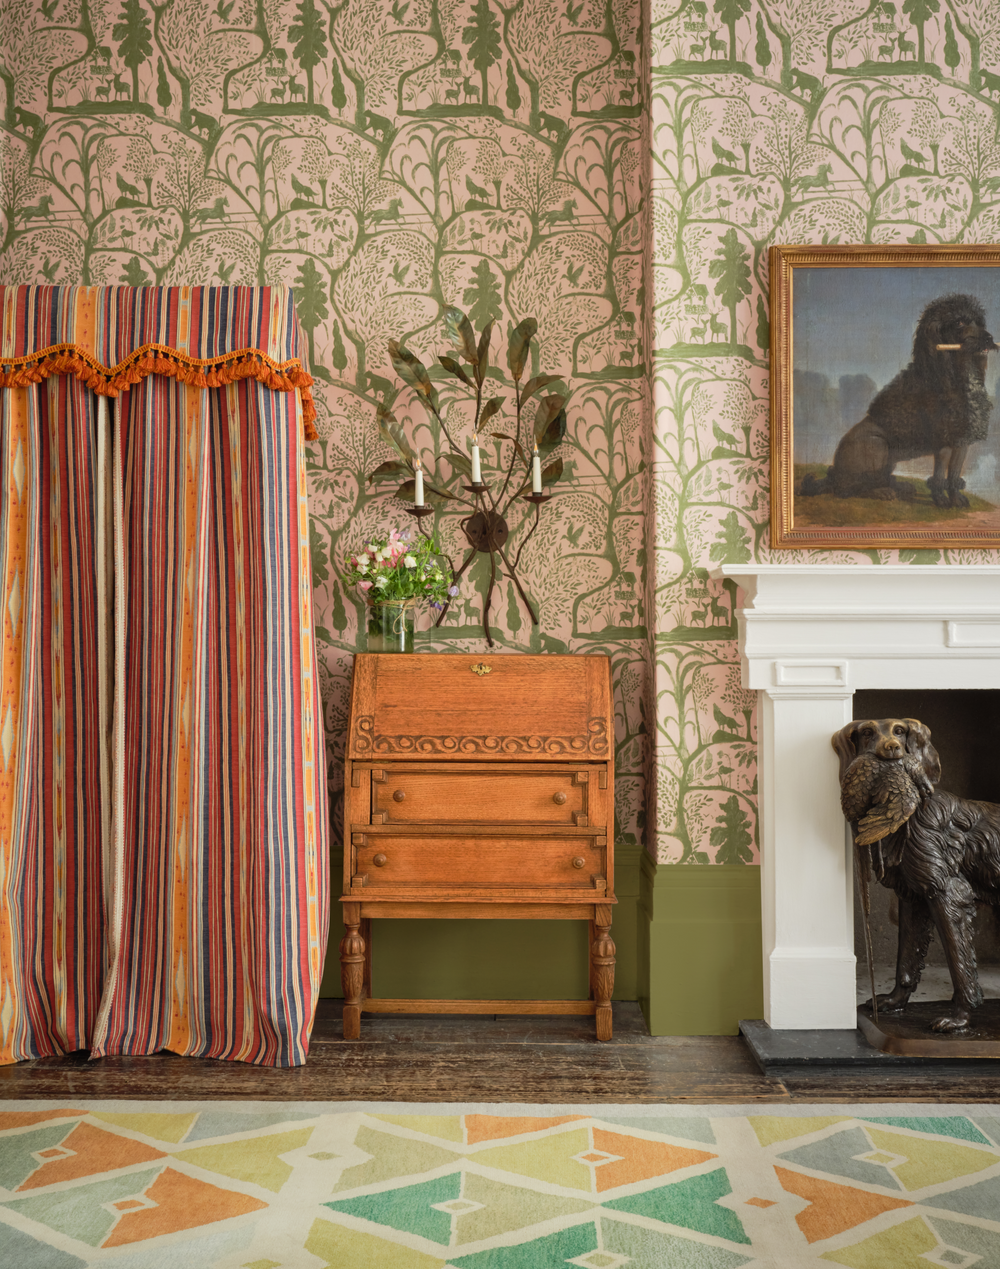 A Fabric and Wallpaper Shop – The Pattern Collective